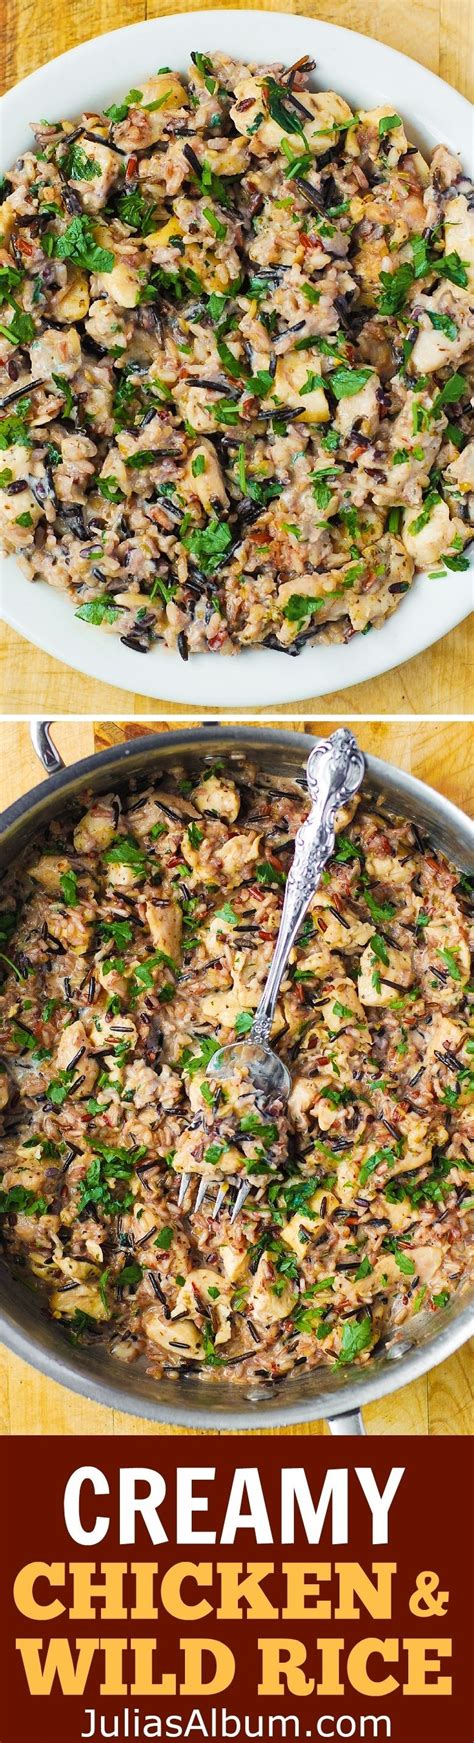 Creamy Parmesan Chicken And Wild Rice Recipe Like Casserole But Made On